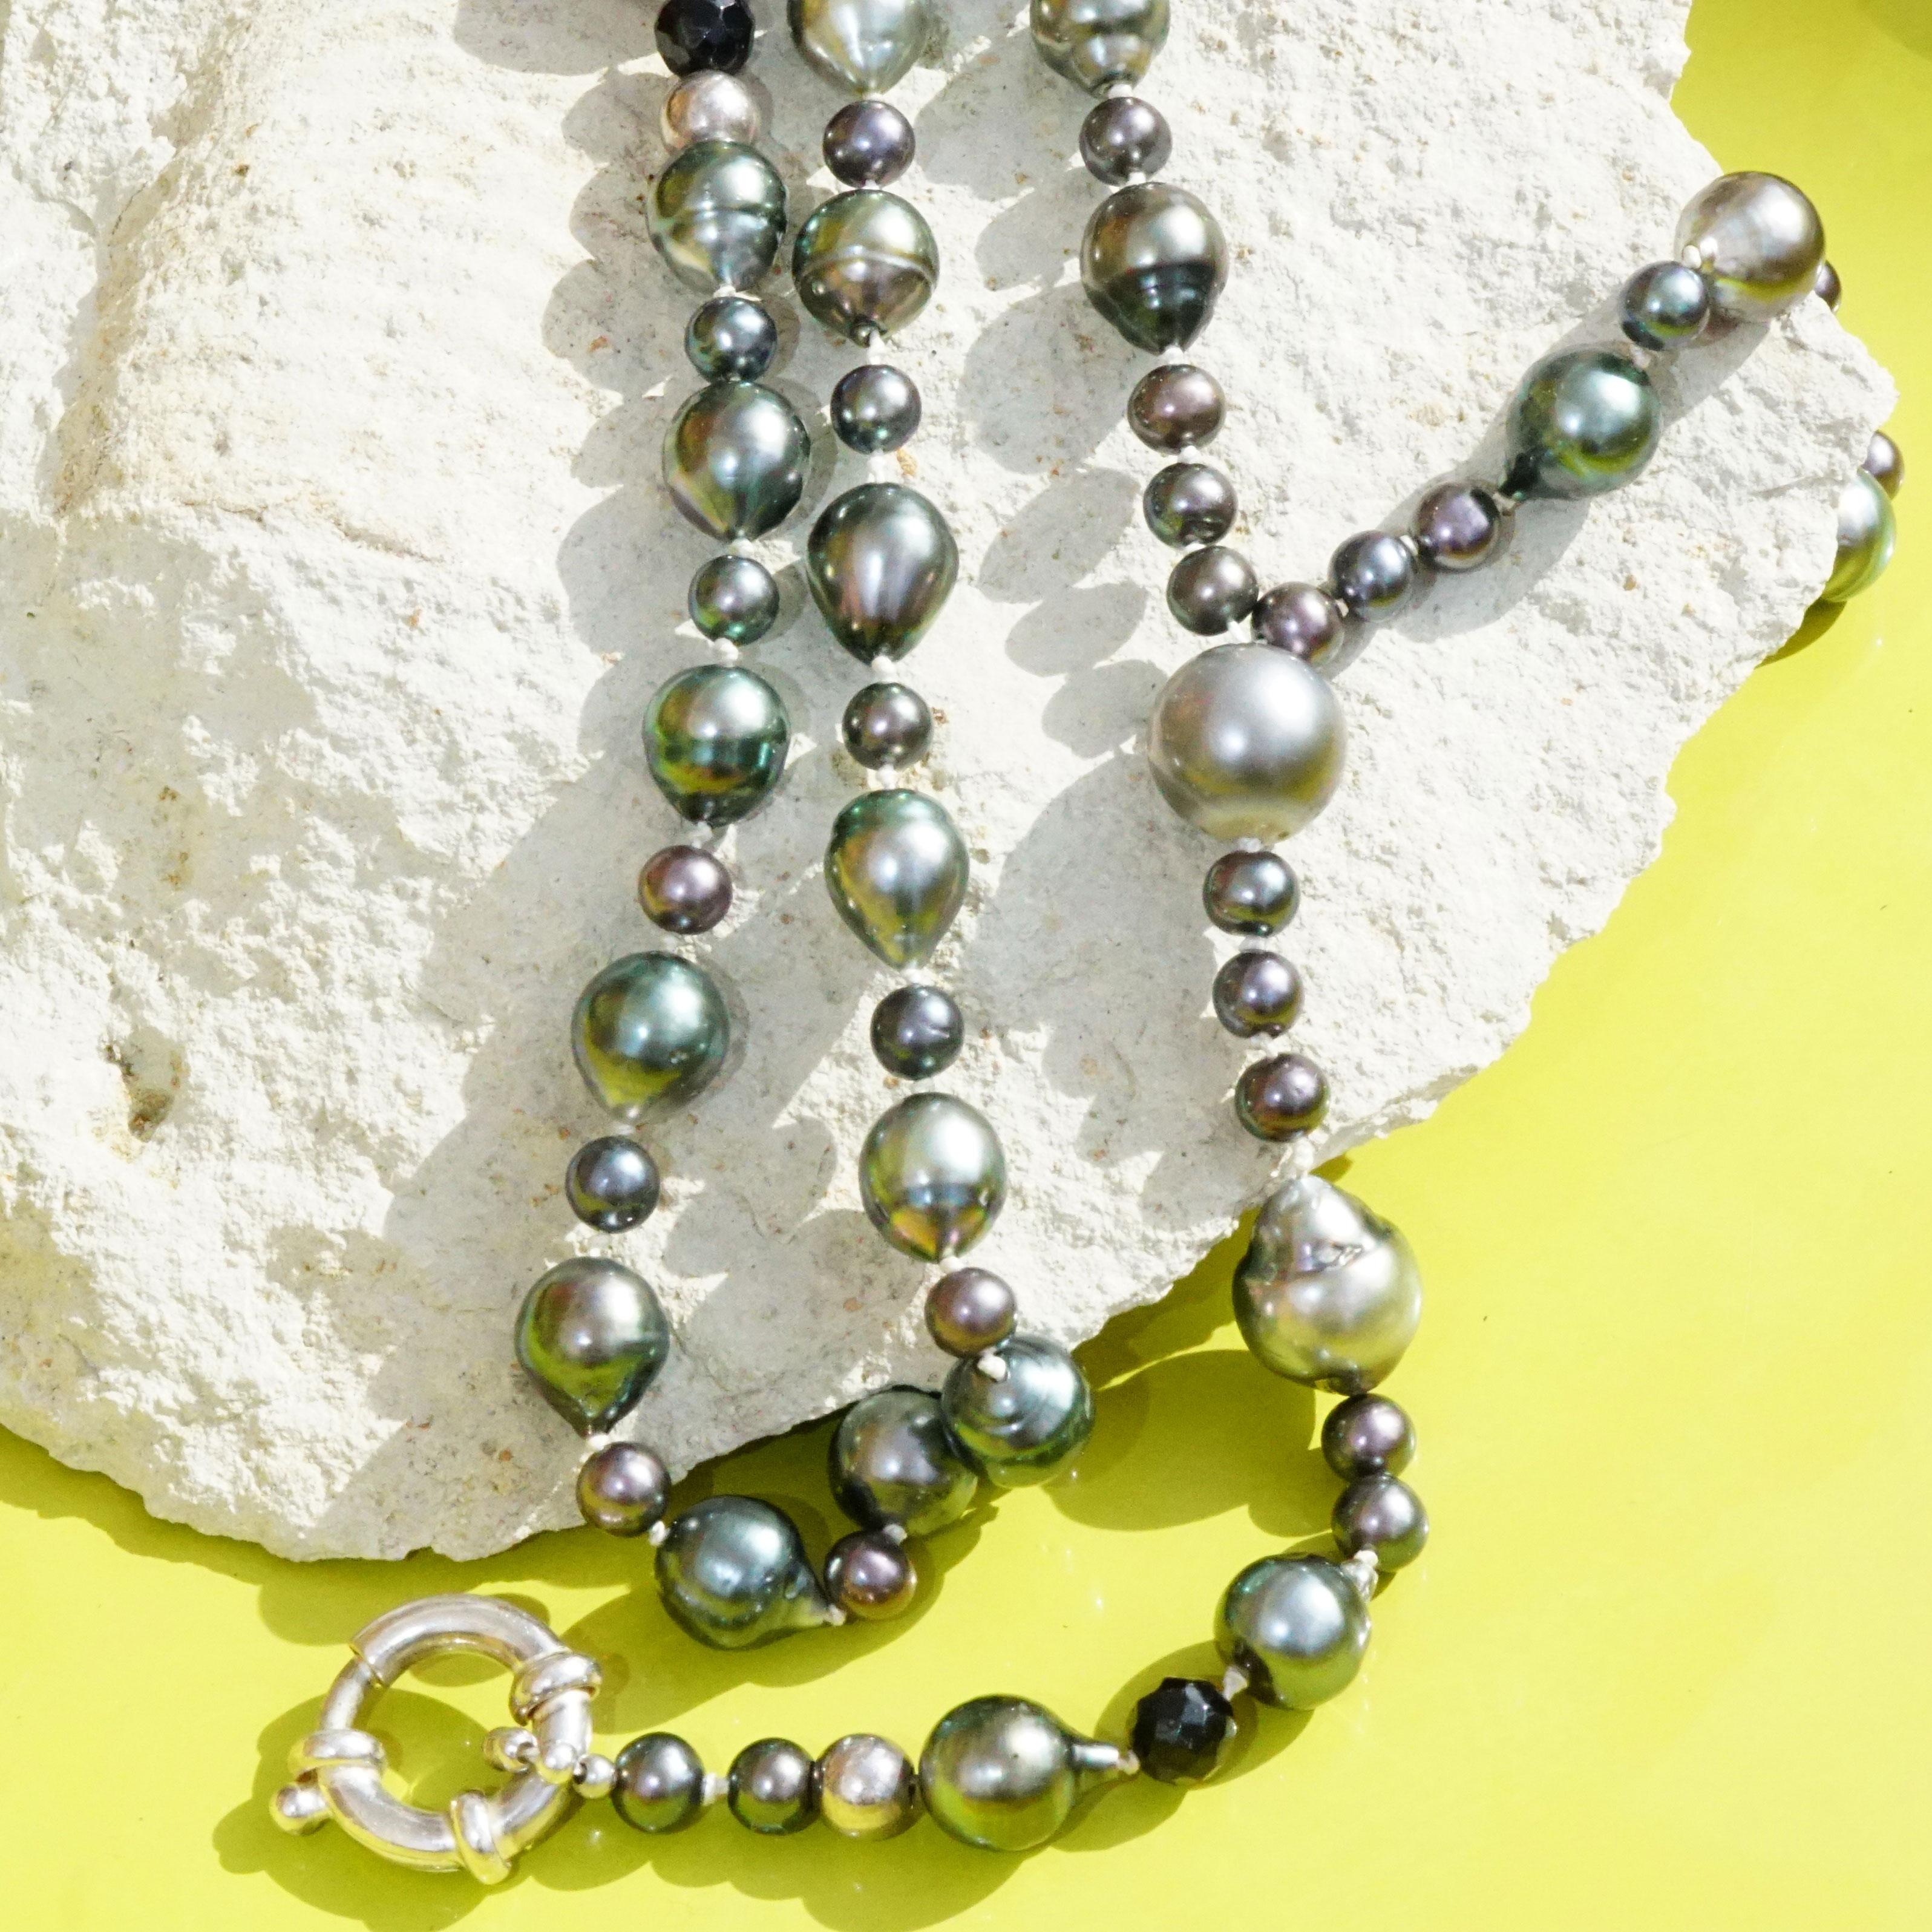 Tahiti Pearl Chain with Changeable Interchangeable Pendant Rosary 3